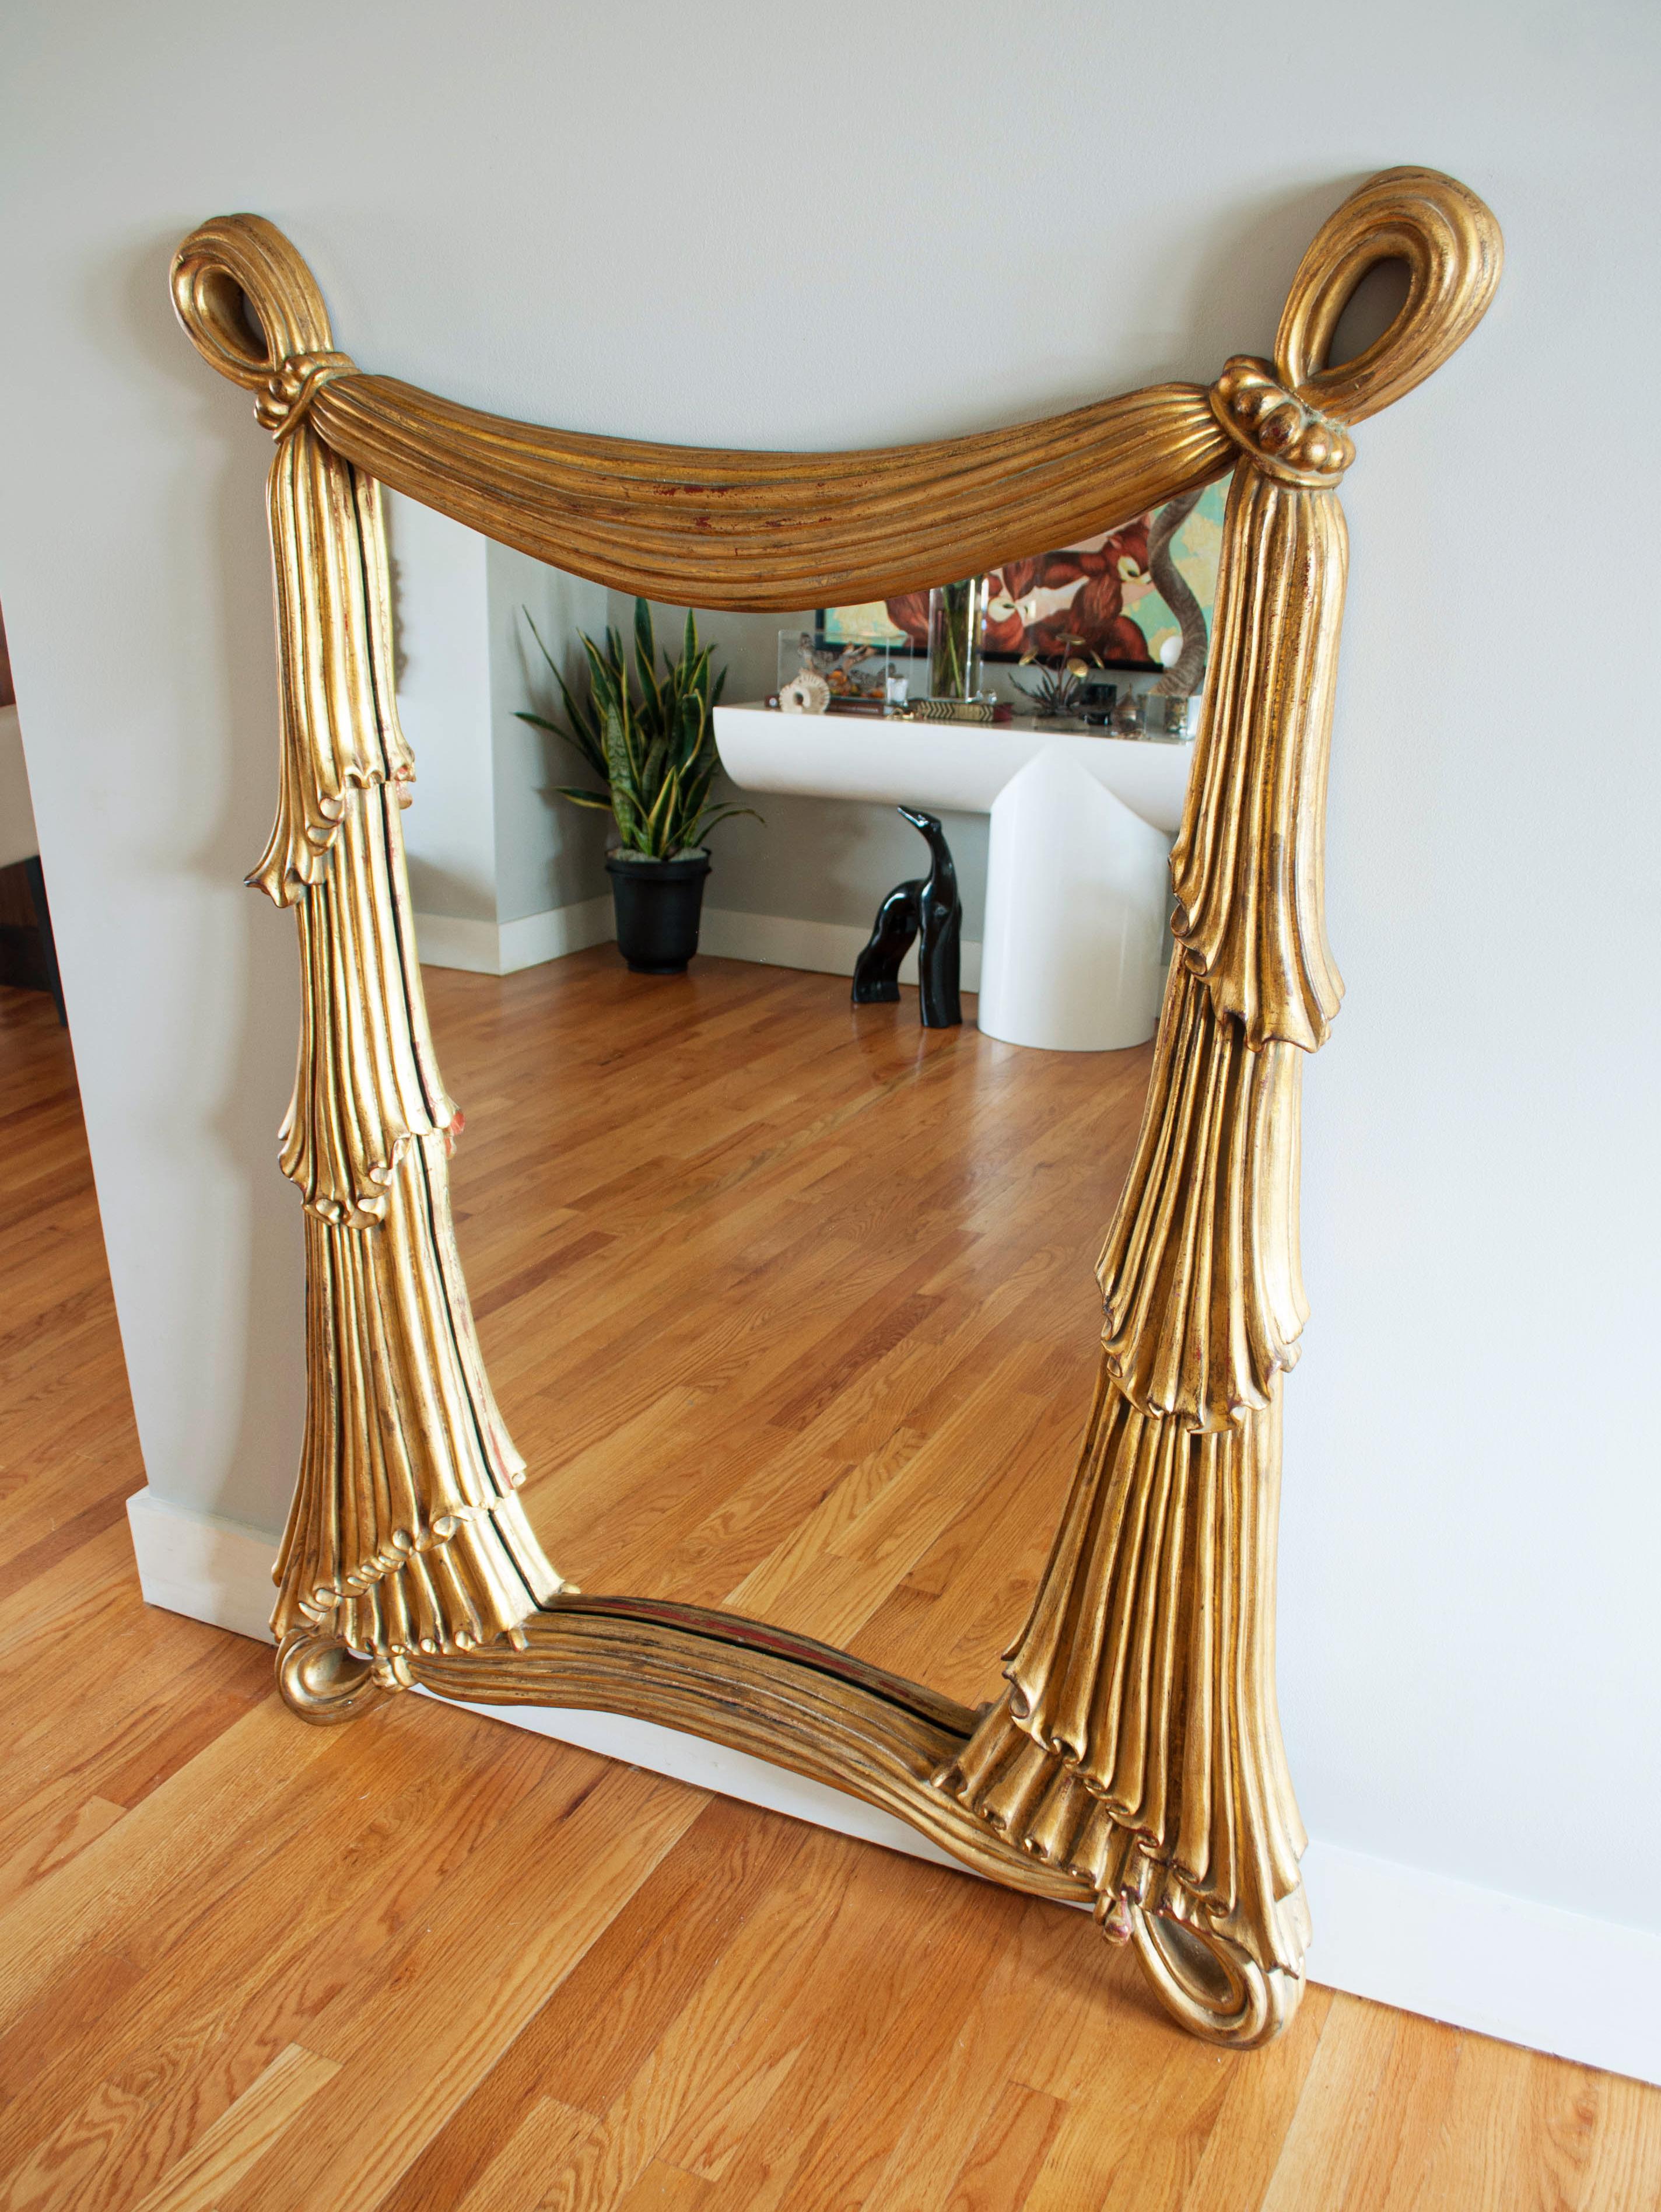 Absolutely stunning sculptural mirror depicting draped fabric. Beautifully executed, this grand mirror is painted to resemble gilded, hand carved wood.